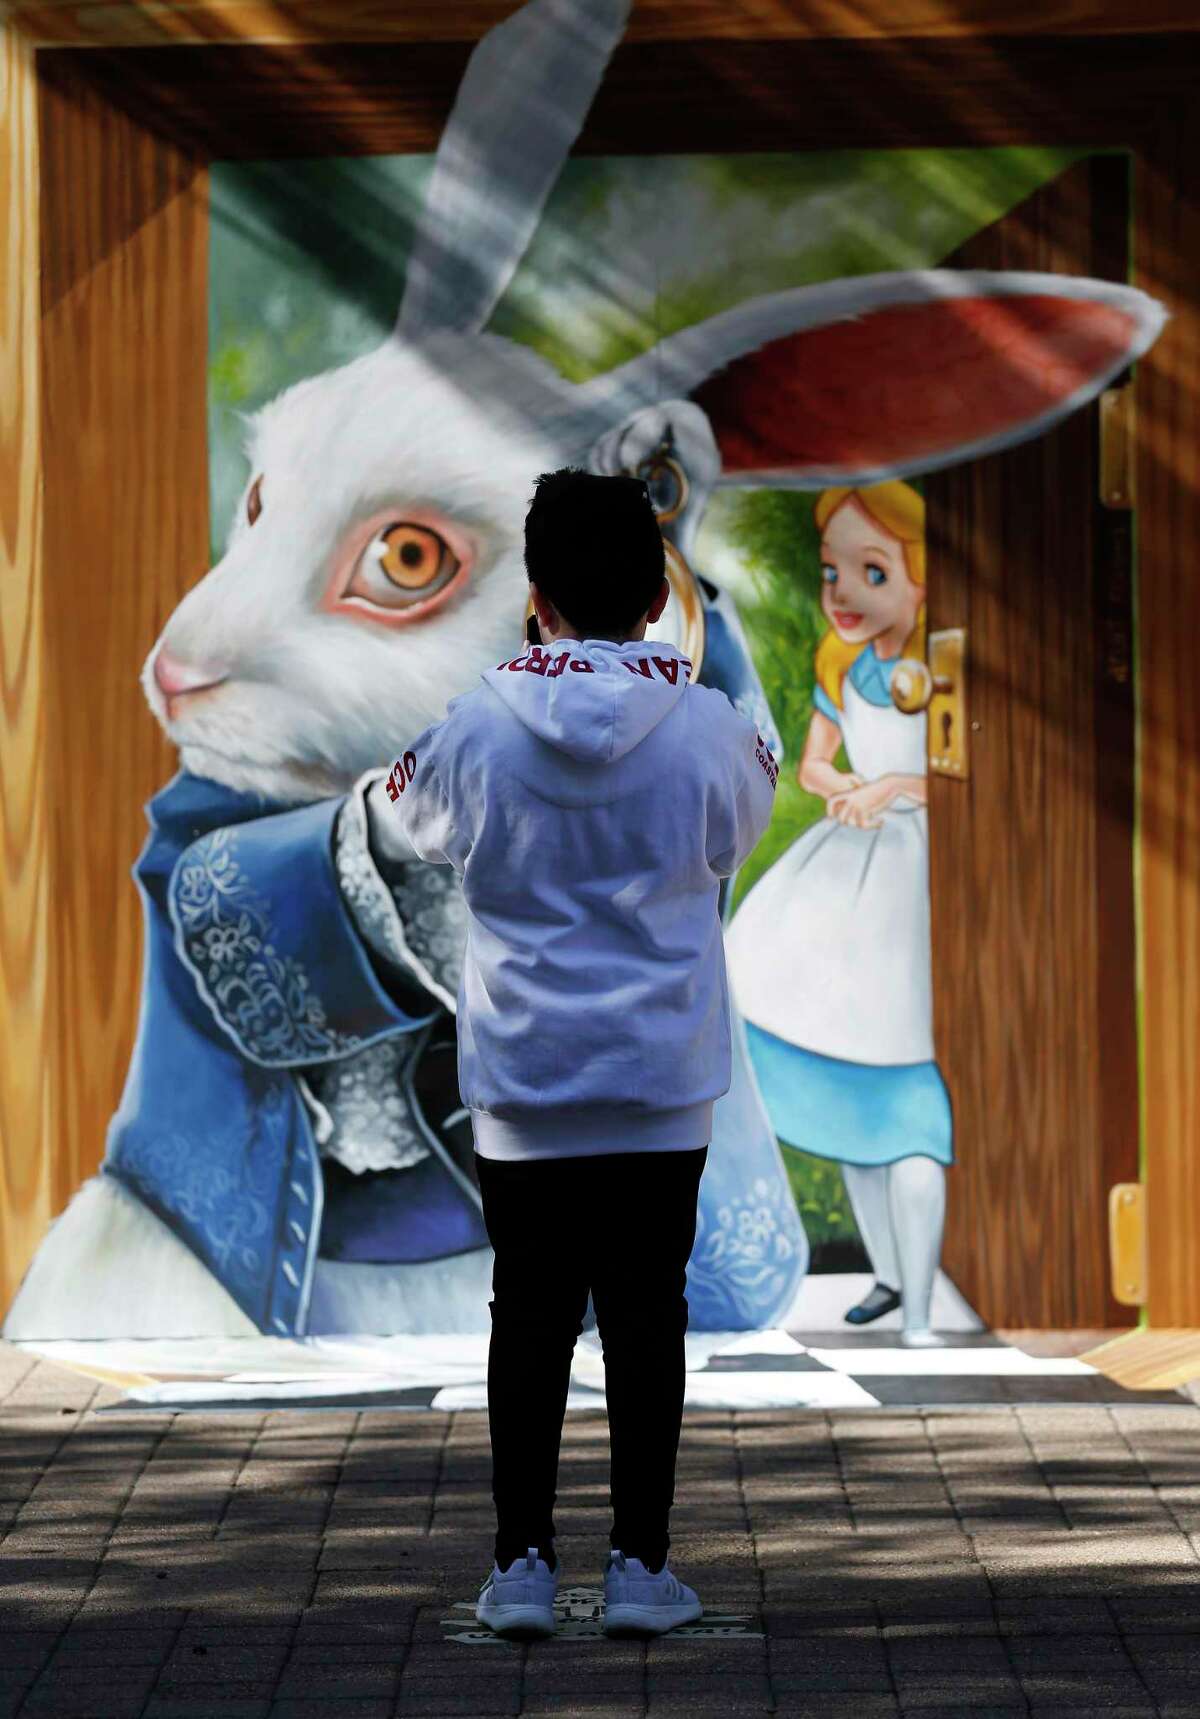 A festival attendee pauses to take a photo of Artist Anat Rosen's "Alice in Wonderland" 3D interactive artwork during the 2019 Houston Via Colori, a street painting festival benefitting The Center for Hearing and Speech Saturday, Nov. 23, 2019, in Houston.